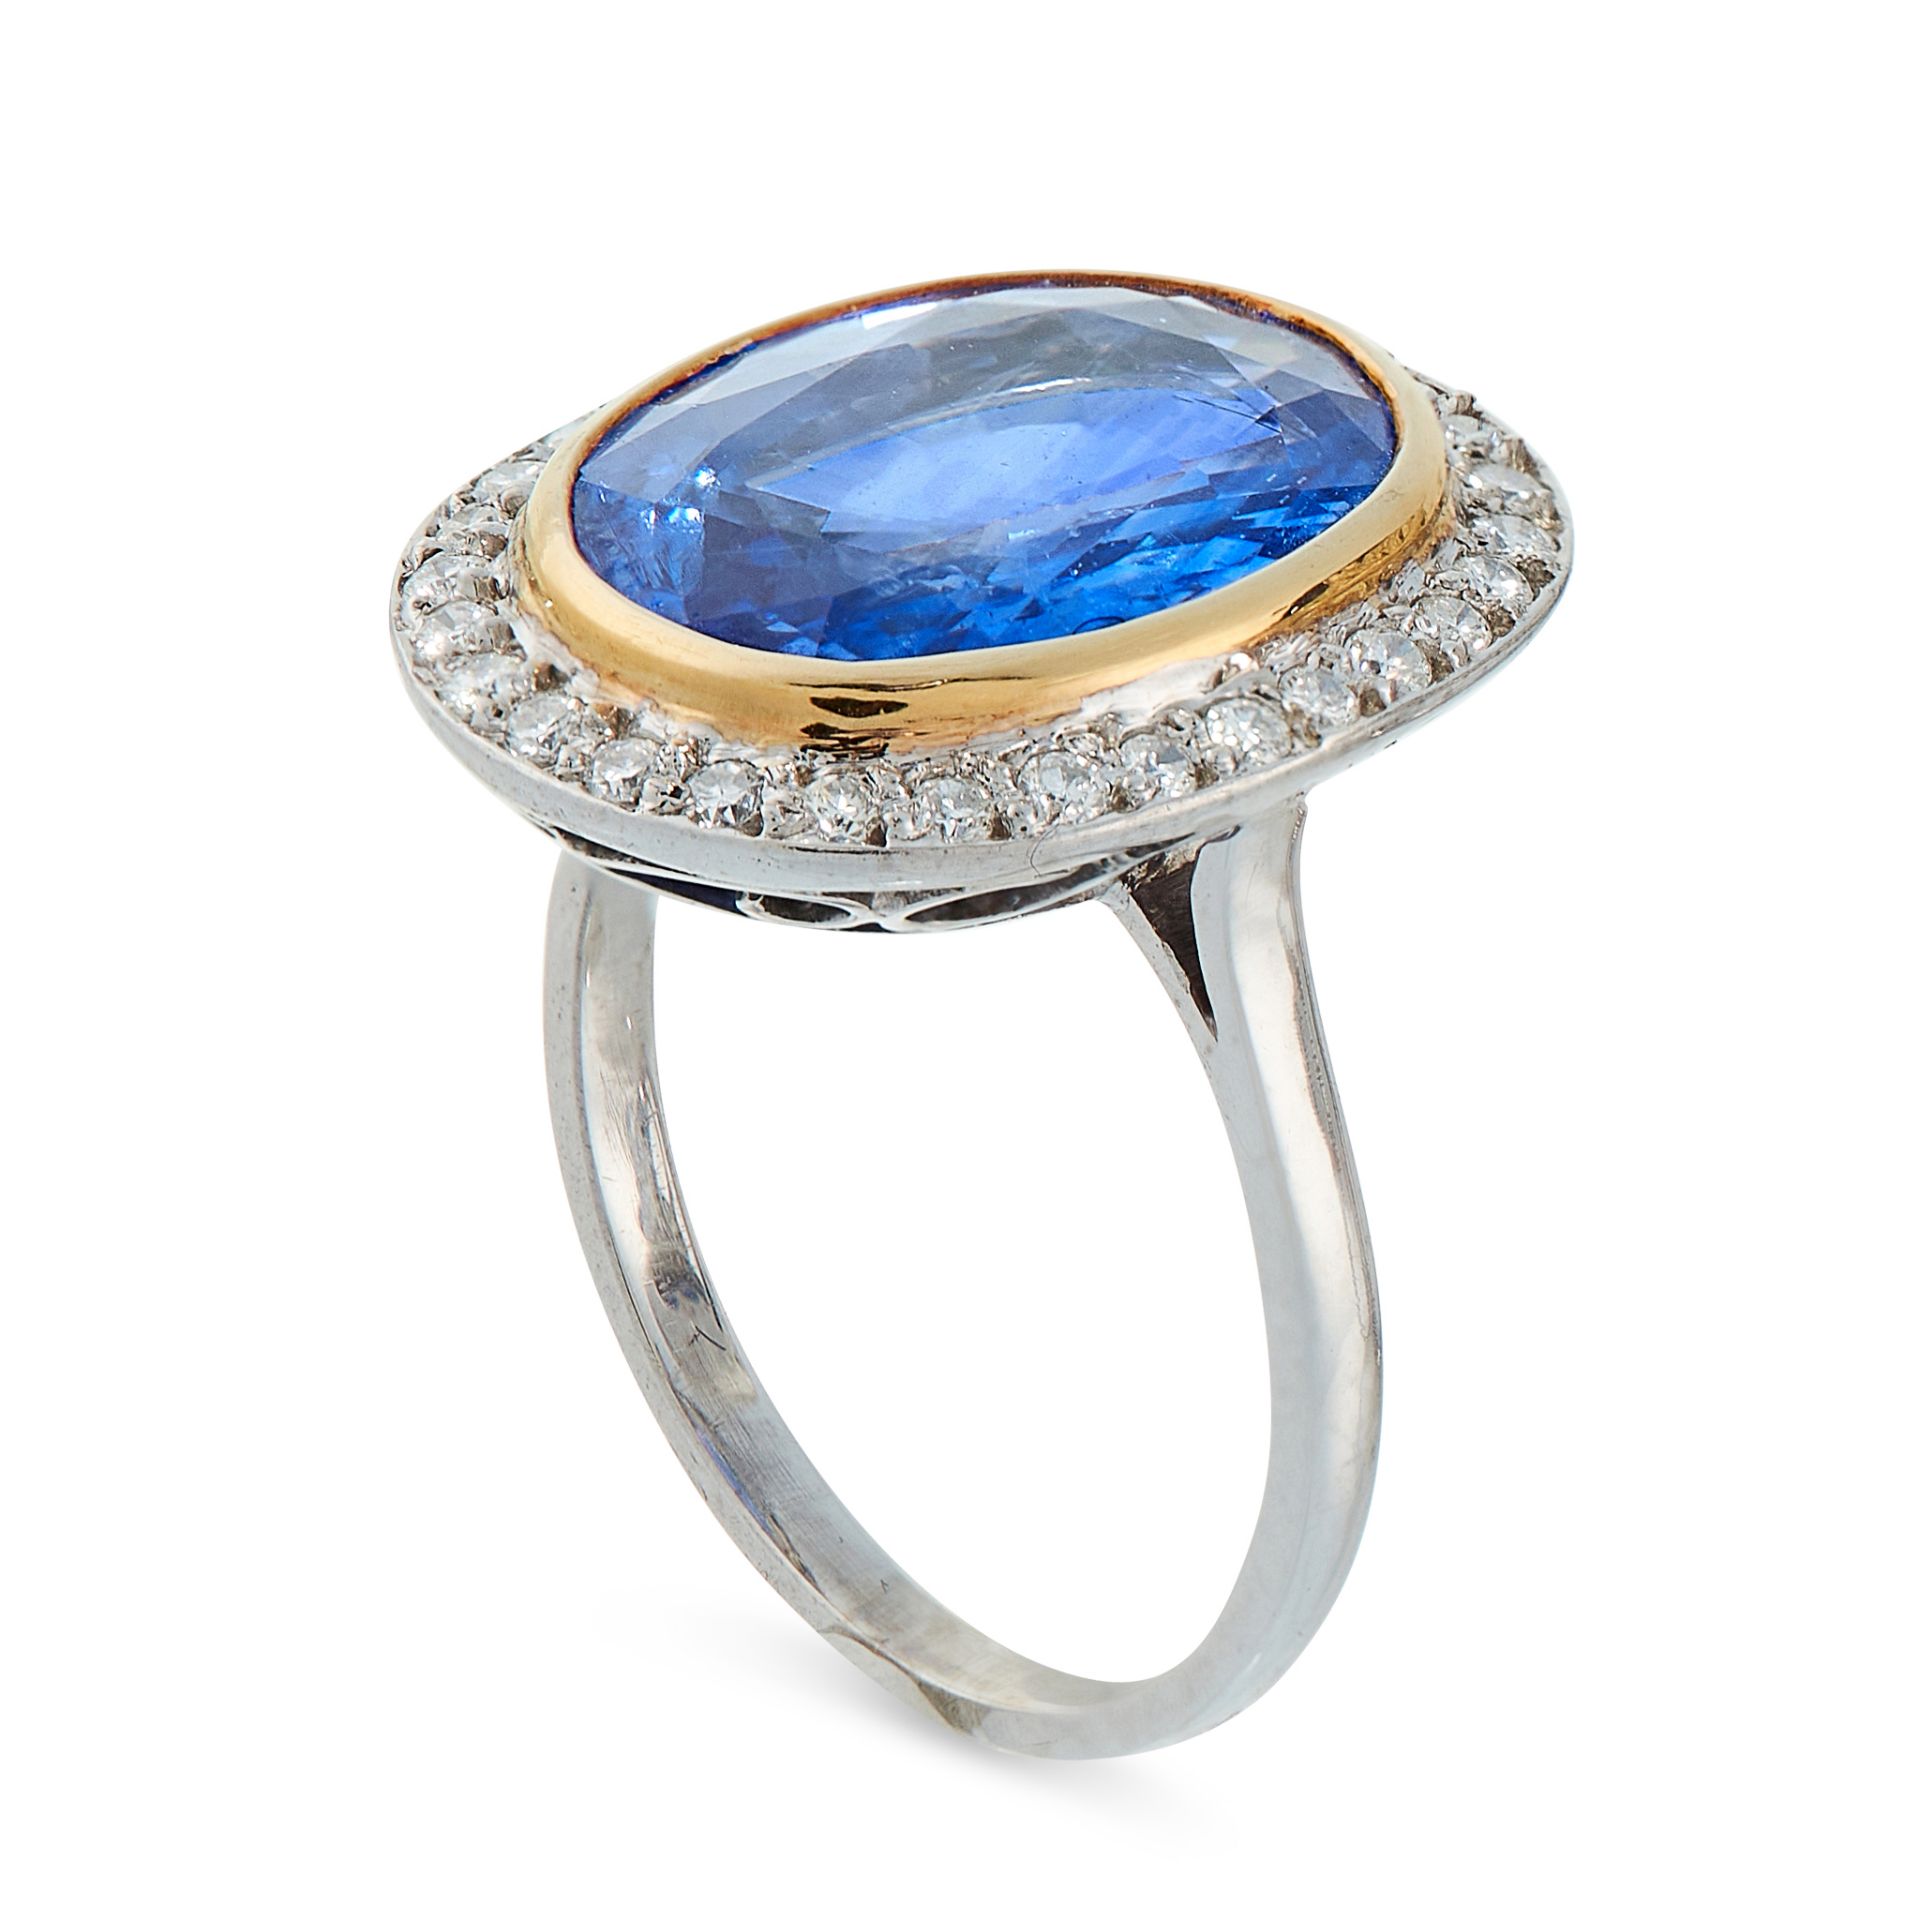 A FRENCH CEYLON NO HEAT SAPPHIRE AND DIAMOND RING in 18ct white and yellow gold, set with an oval... - Image 2 of 2